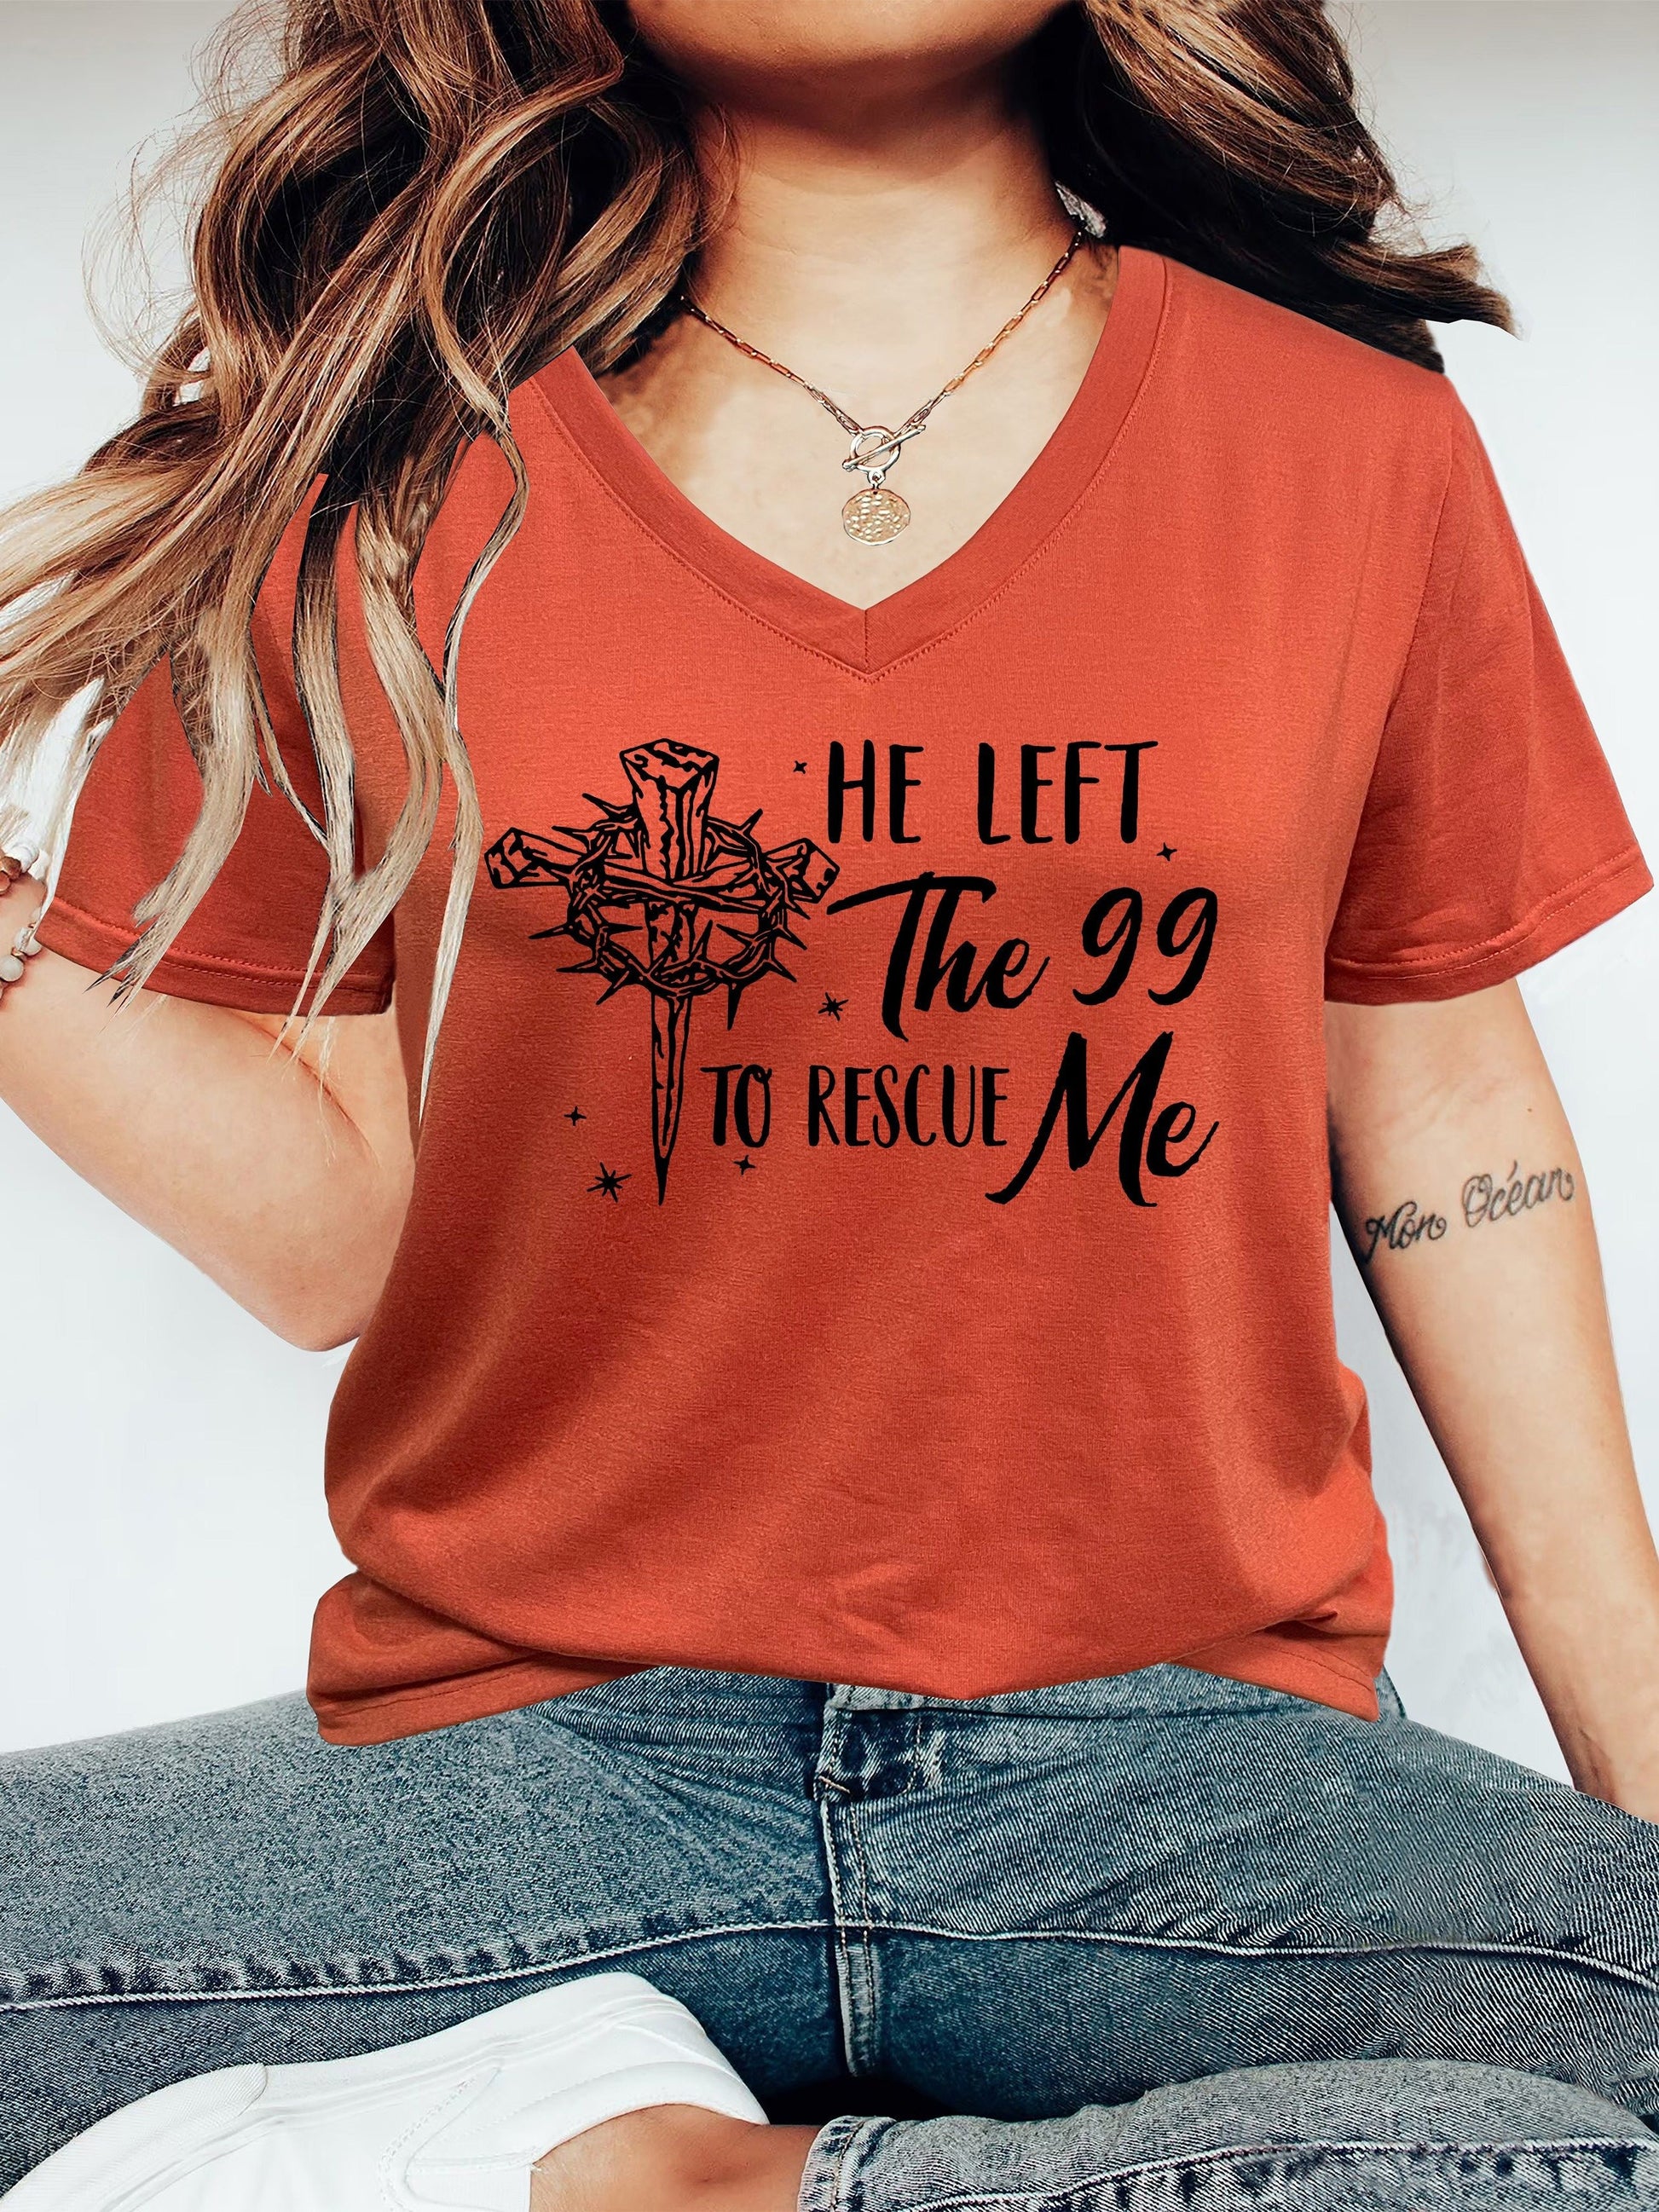 He Left The 99 To Rescue Me Plus Size Women's Christian T-shirt claimedbygoddesigns